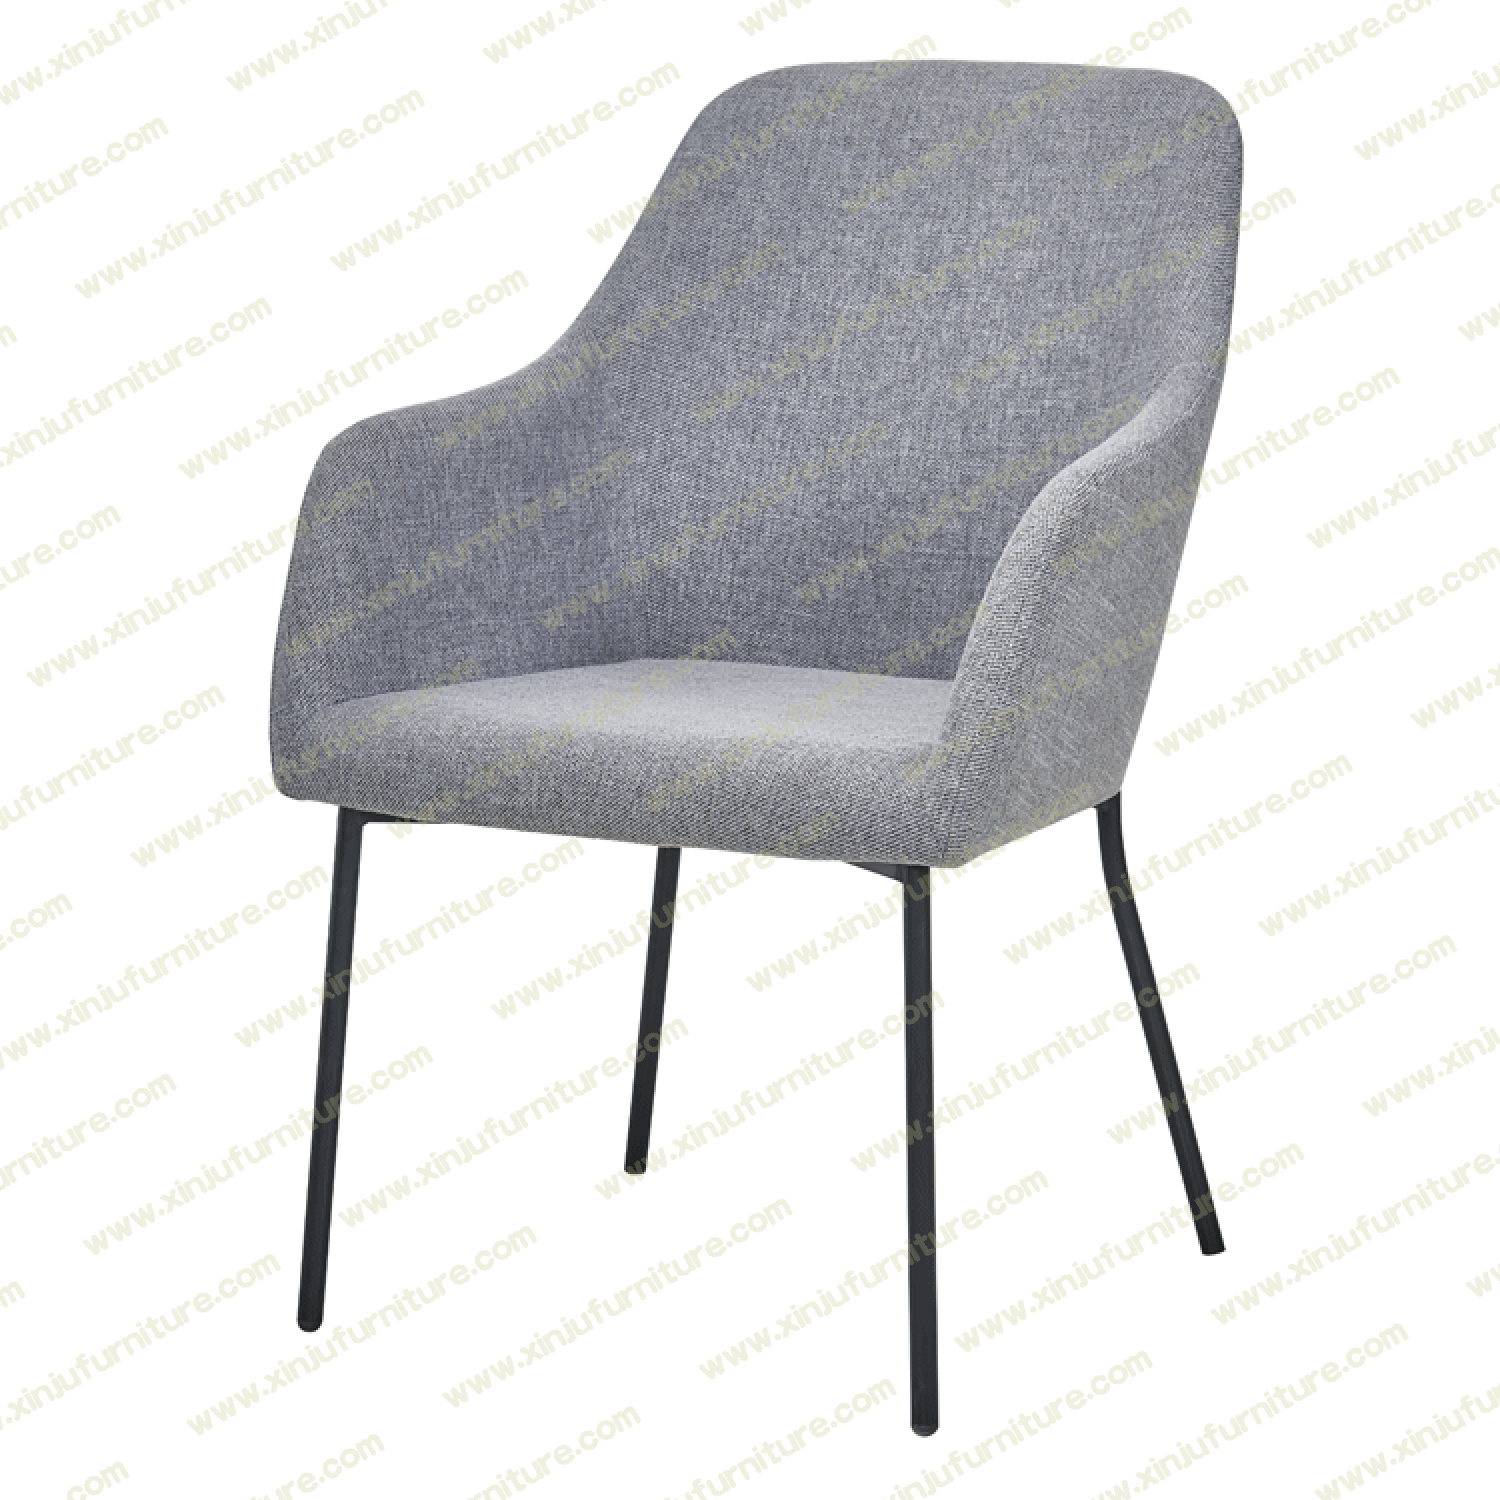 High back grey dining chair